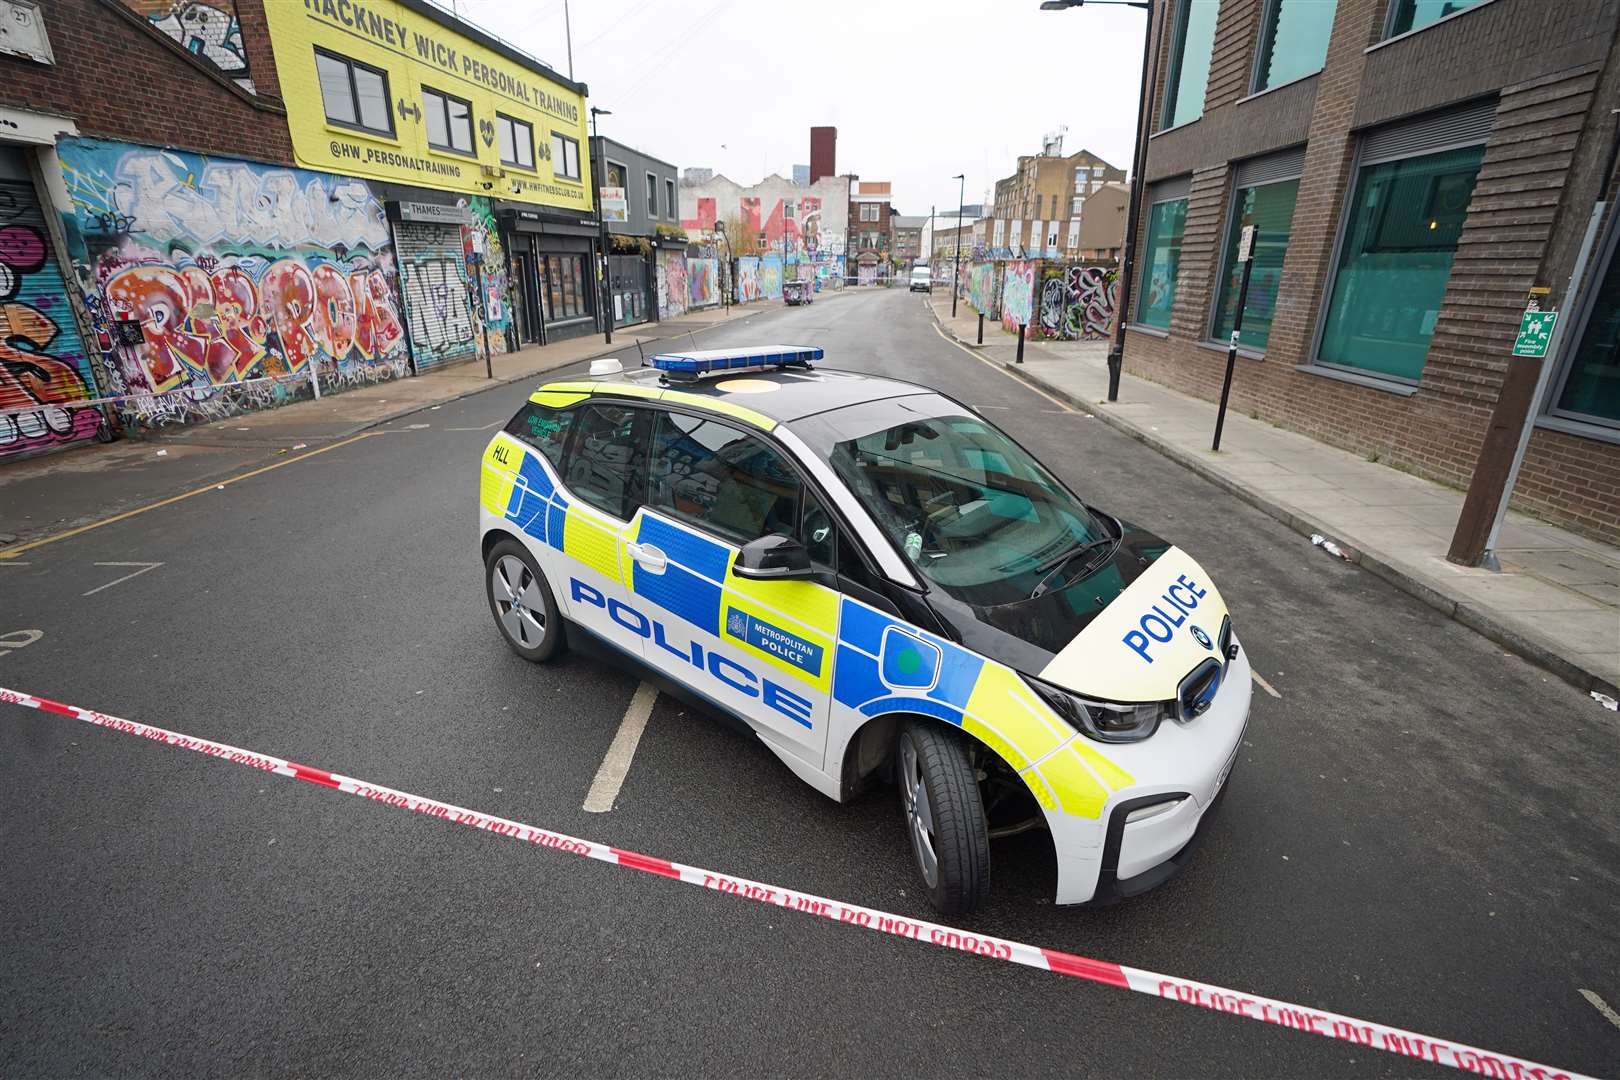 A police car near the scene at White Post Lane, Hackney Wick (James Manning/PA)